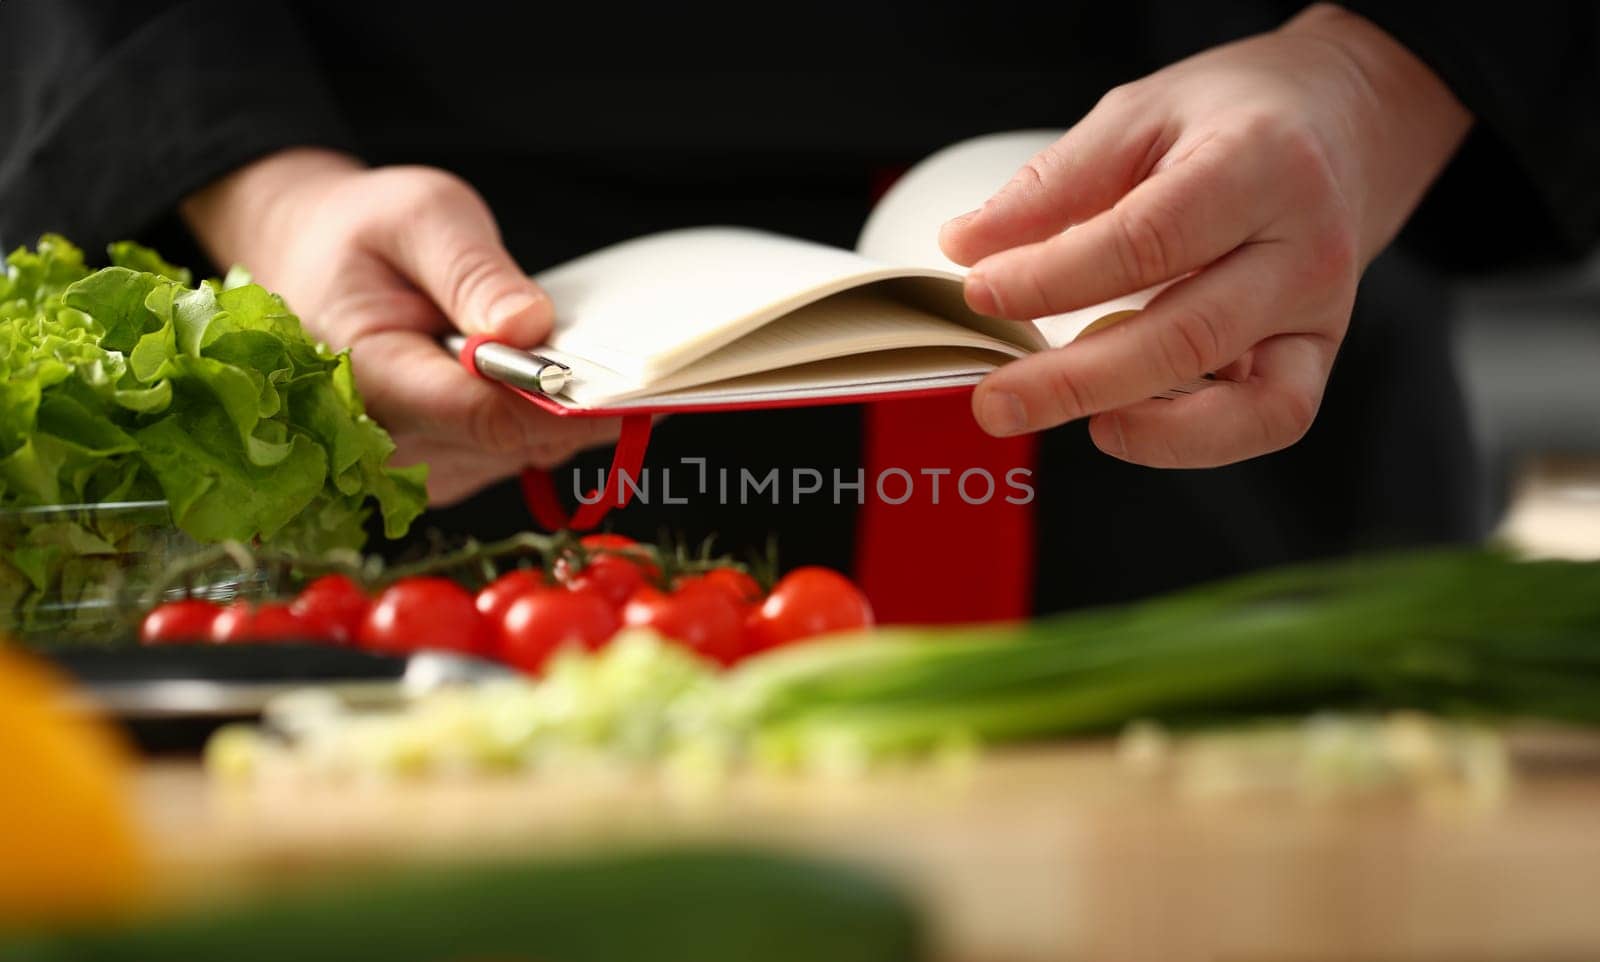 Male cook hand hold siver pen and wright open book of recipes on background of vegetables. Chef writes new combination of taste in home magazine shopping organizer concept list